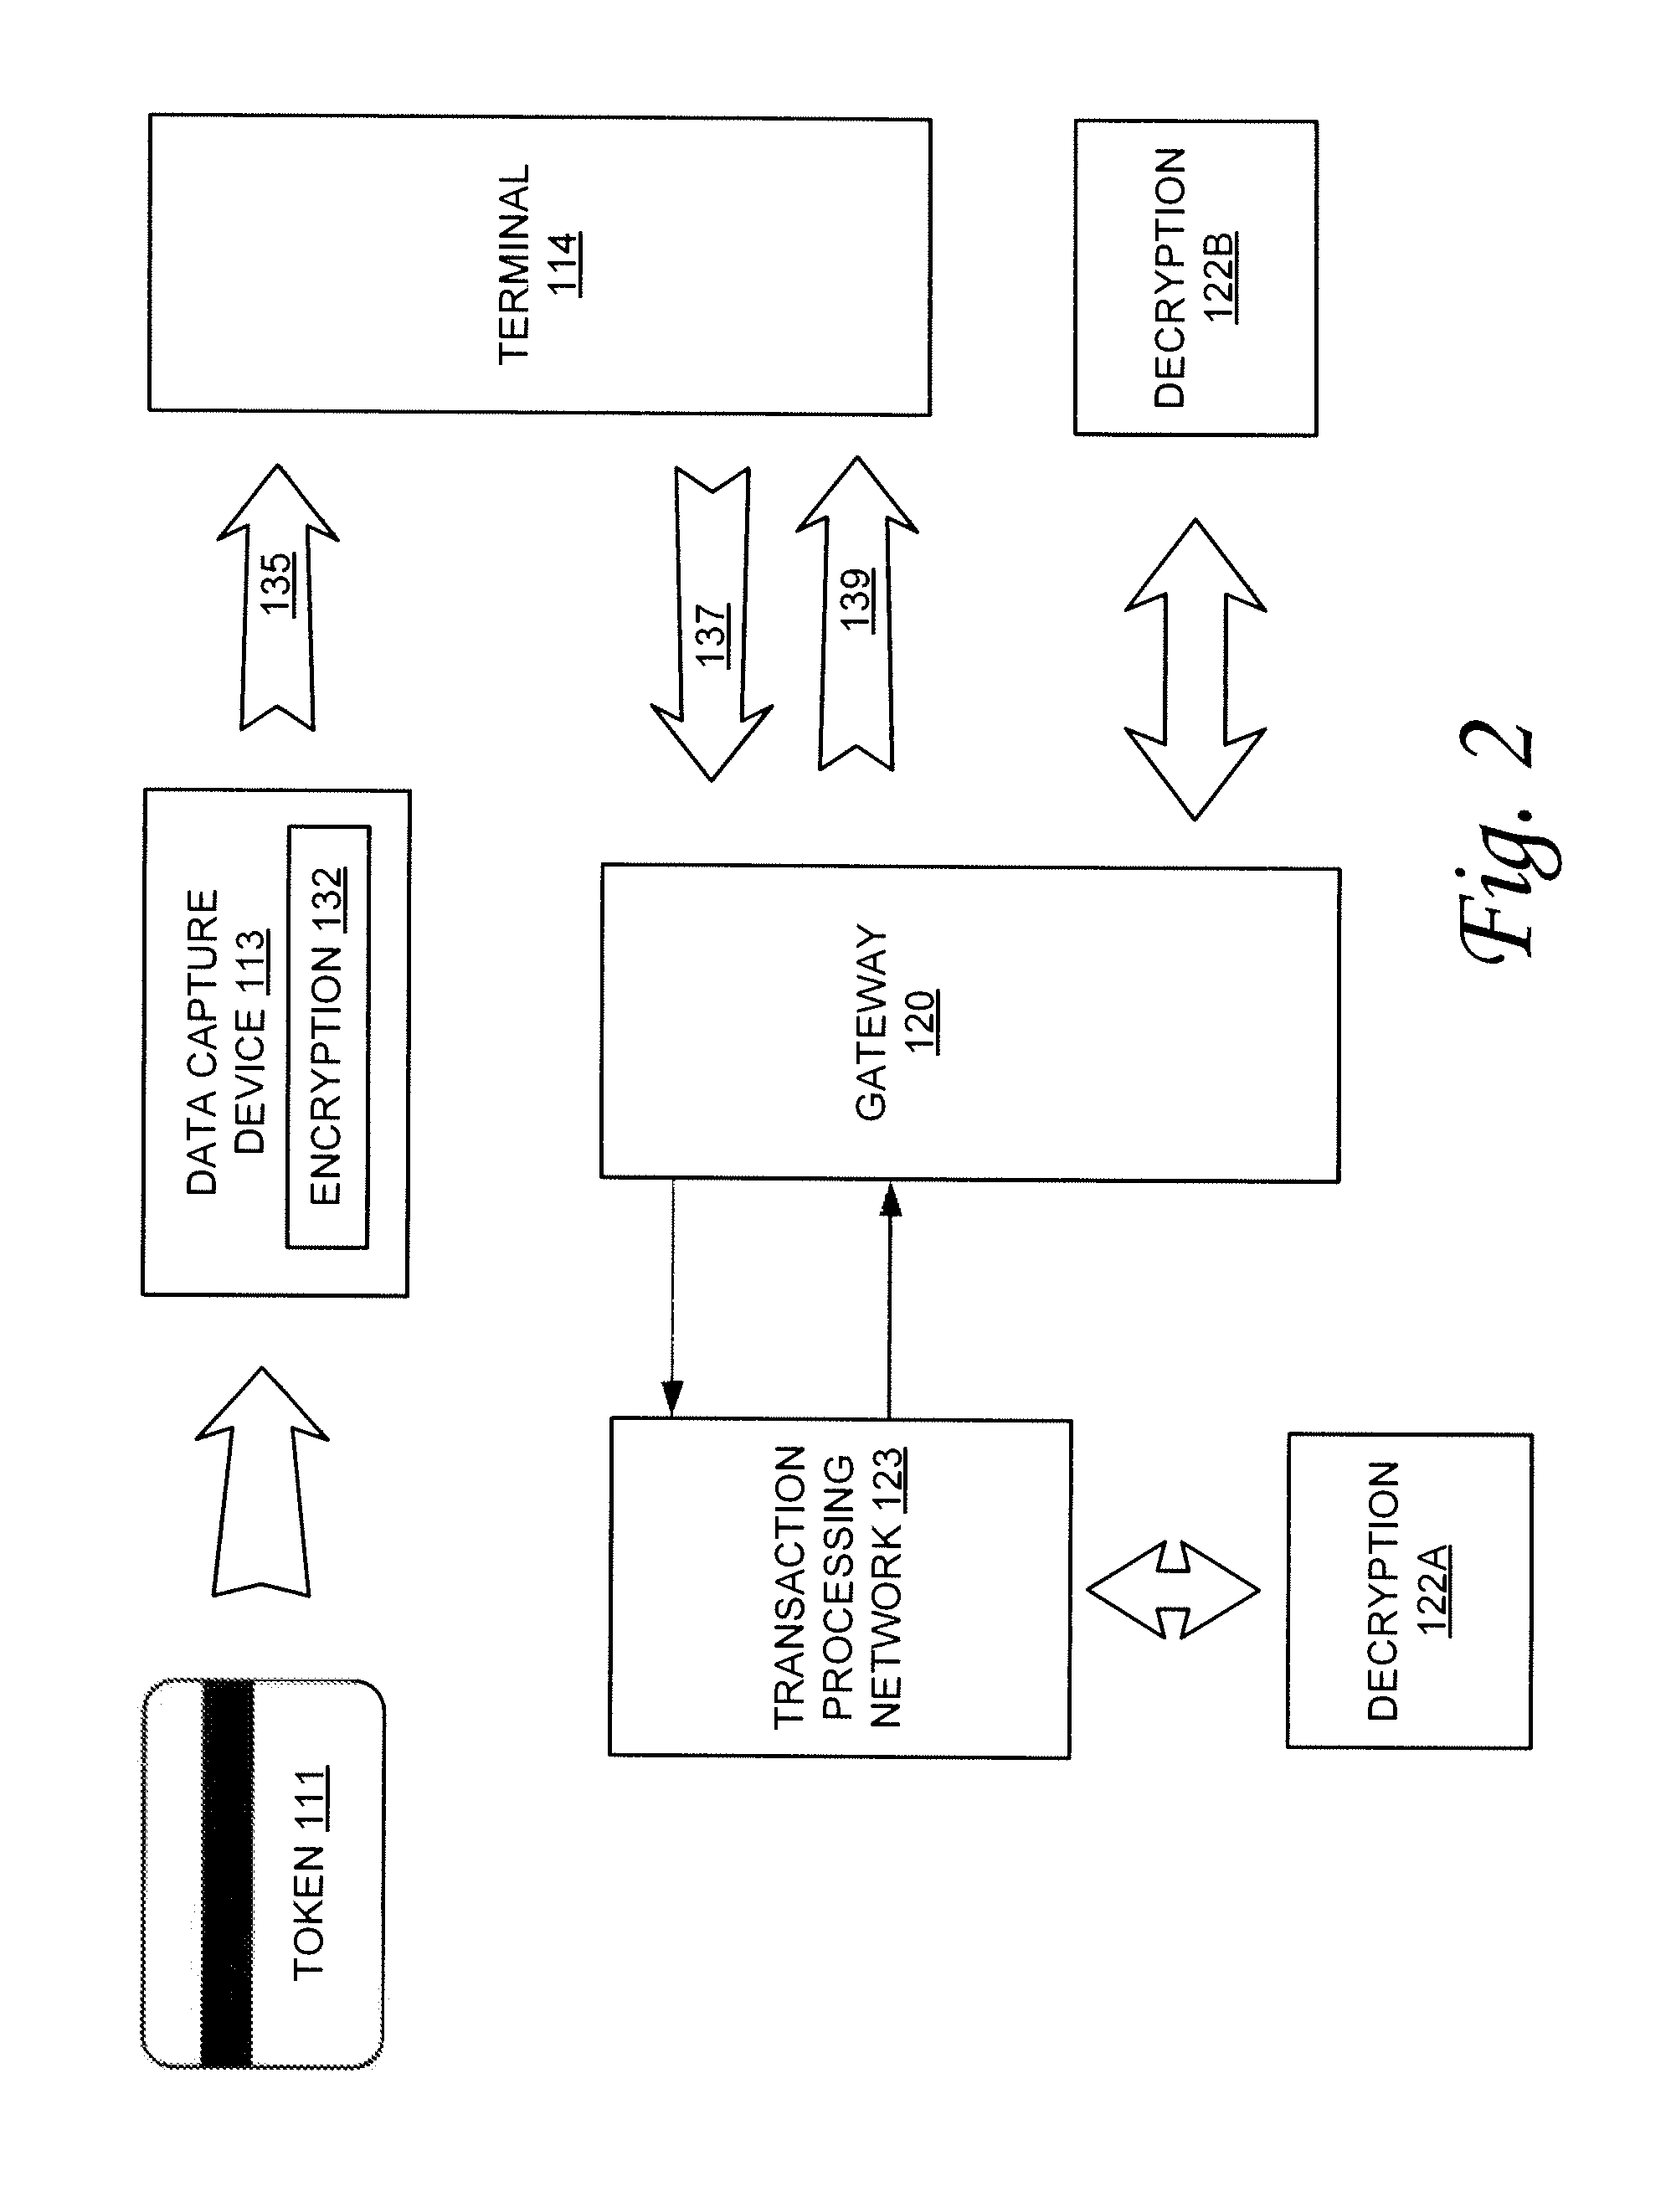 System and method for secure transaction